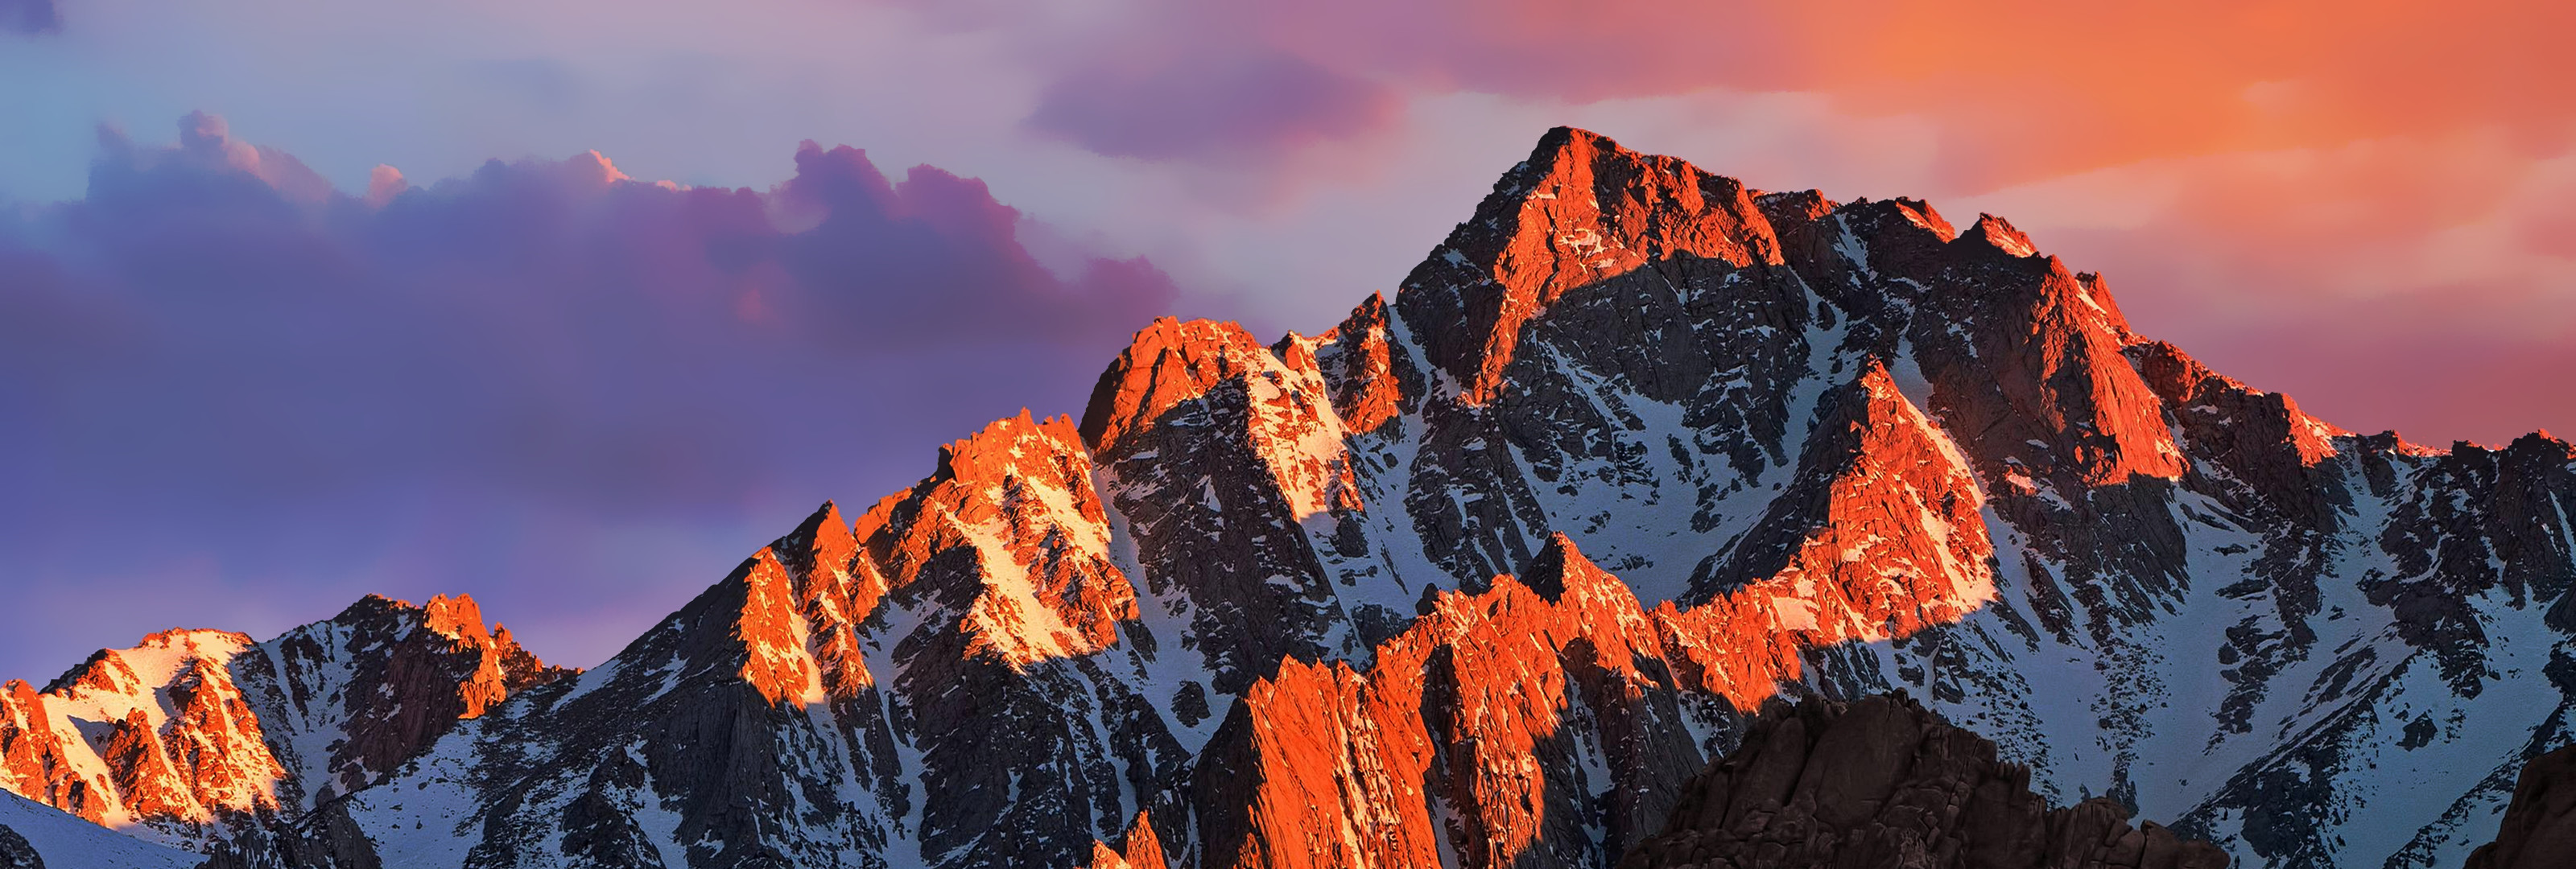 3200x1080 ... MacOS extended wallpaper for ultrawide monitors by NextSource